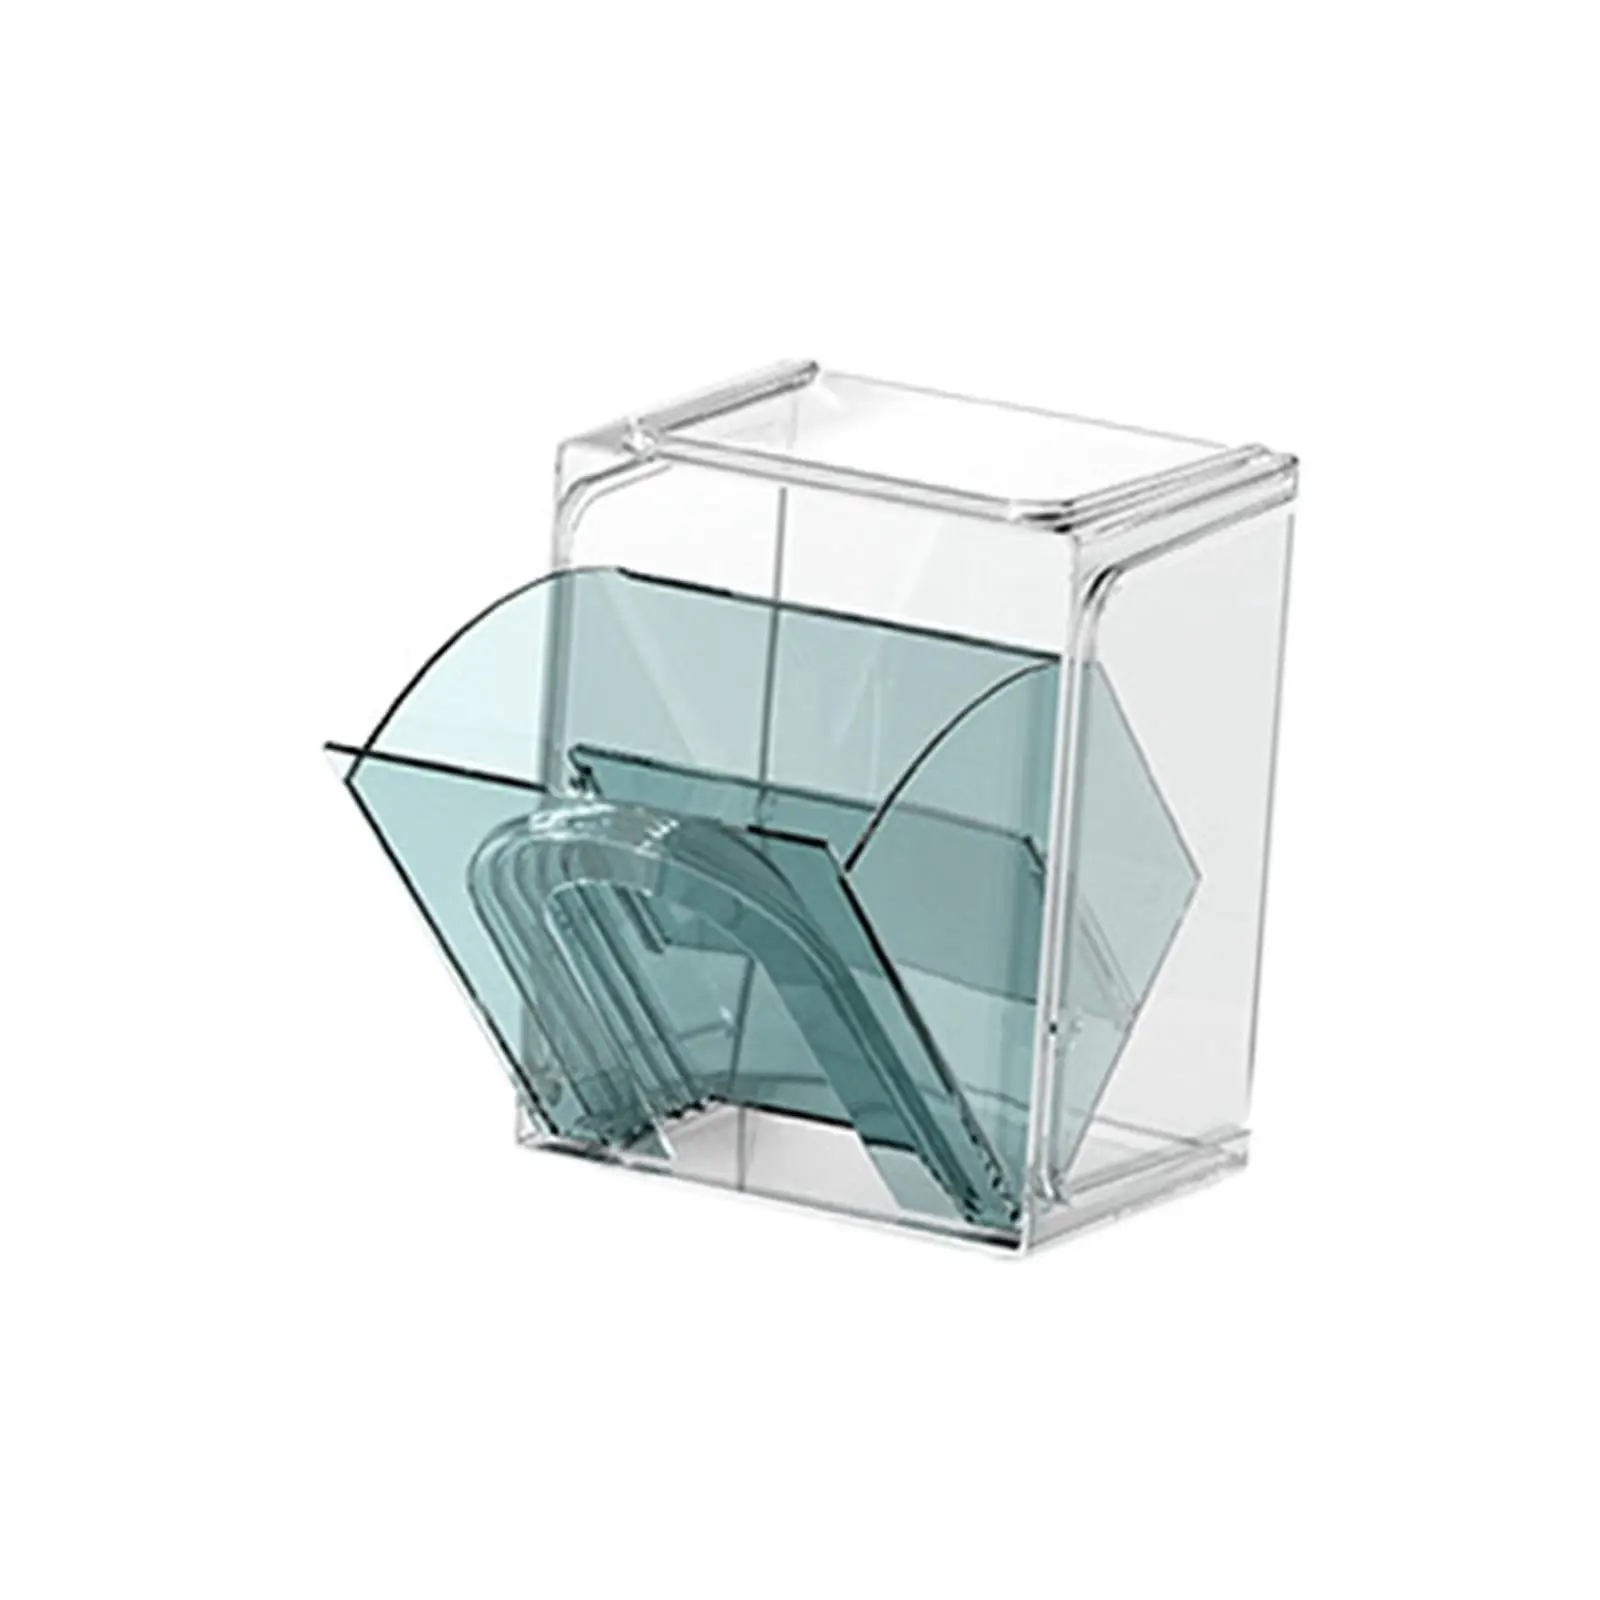 Tea Storage Box Storage Organizer Box Multiuse Transparent Coffee Capsules Holder for Closets Pantry Dining Cabinets Office